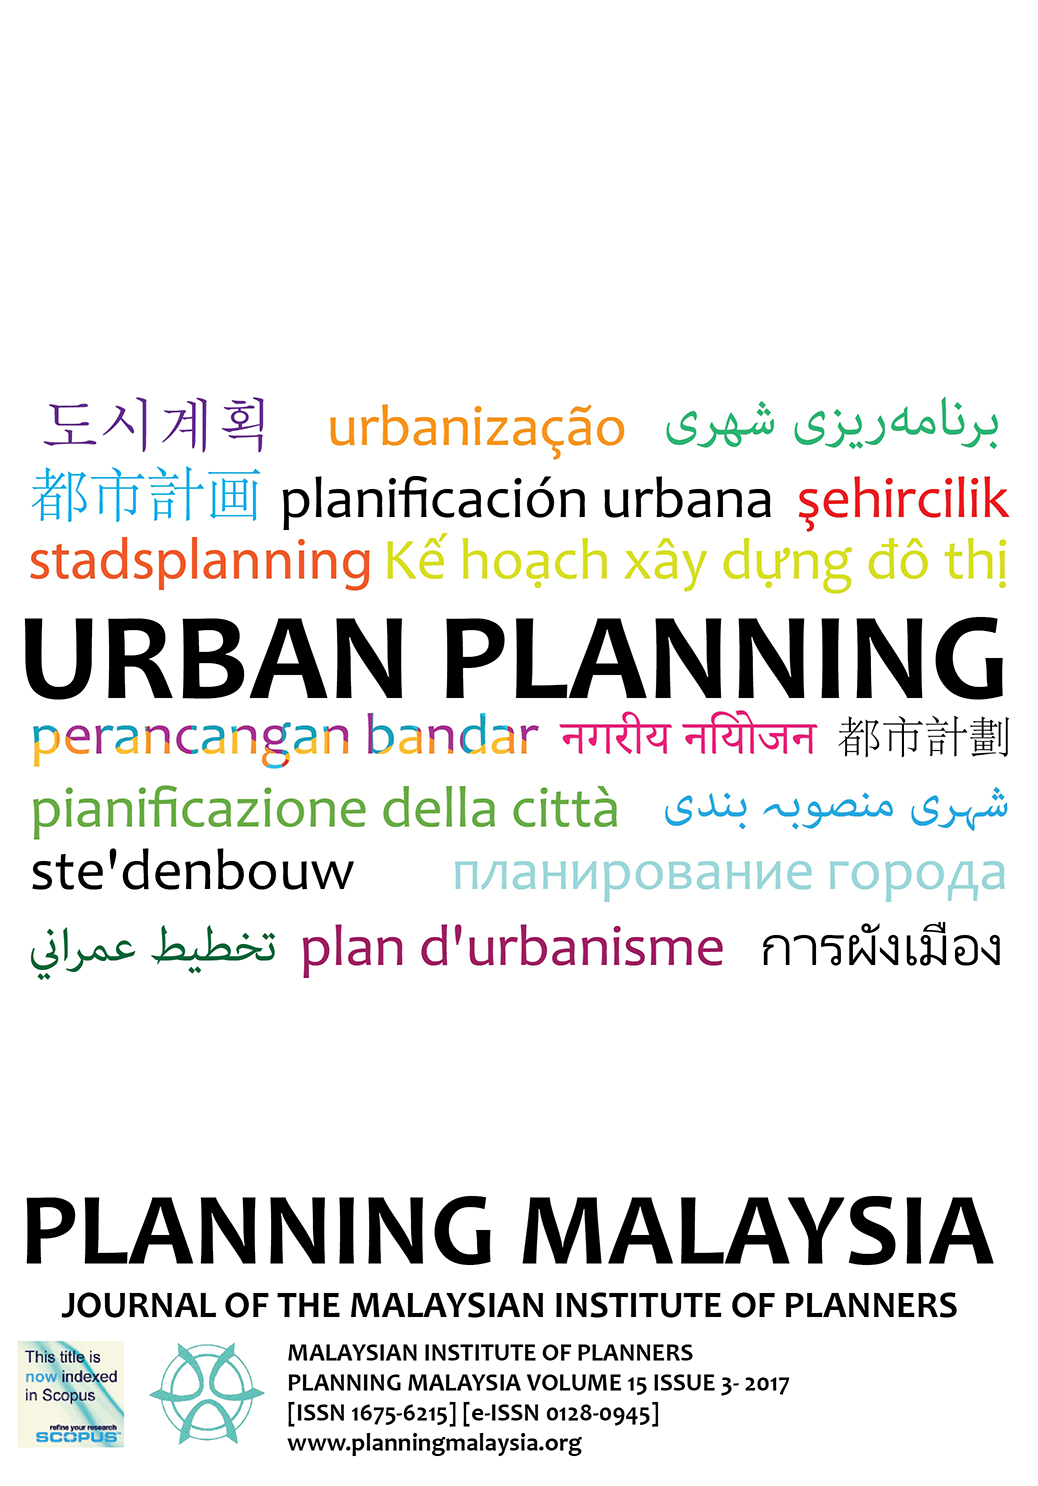 					View Vol. 15 (2017): PLANNING MALAYSIA JOURNAL : Volume 15, Issue 3, 2017
				